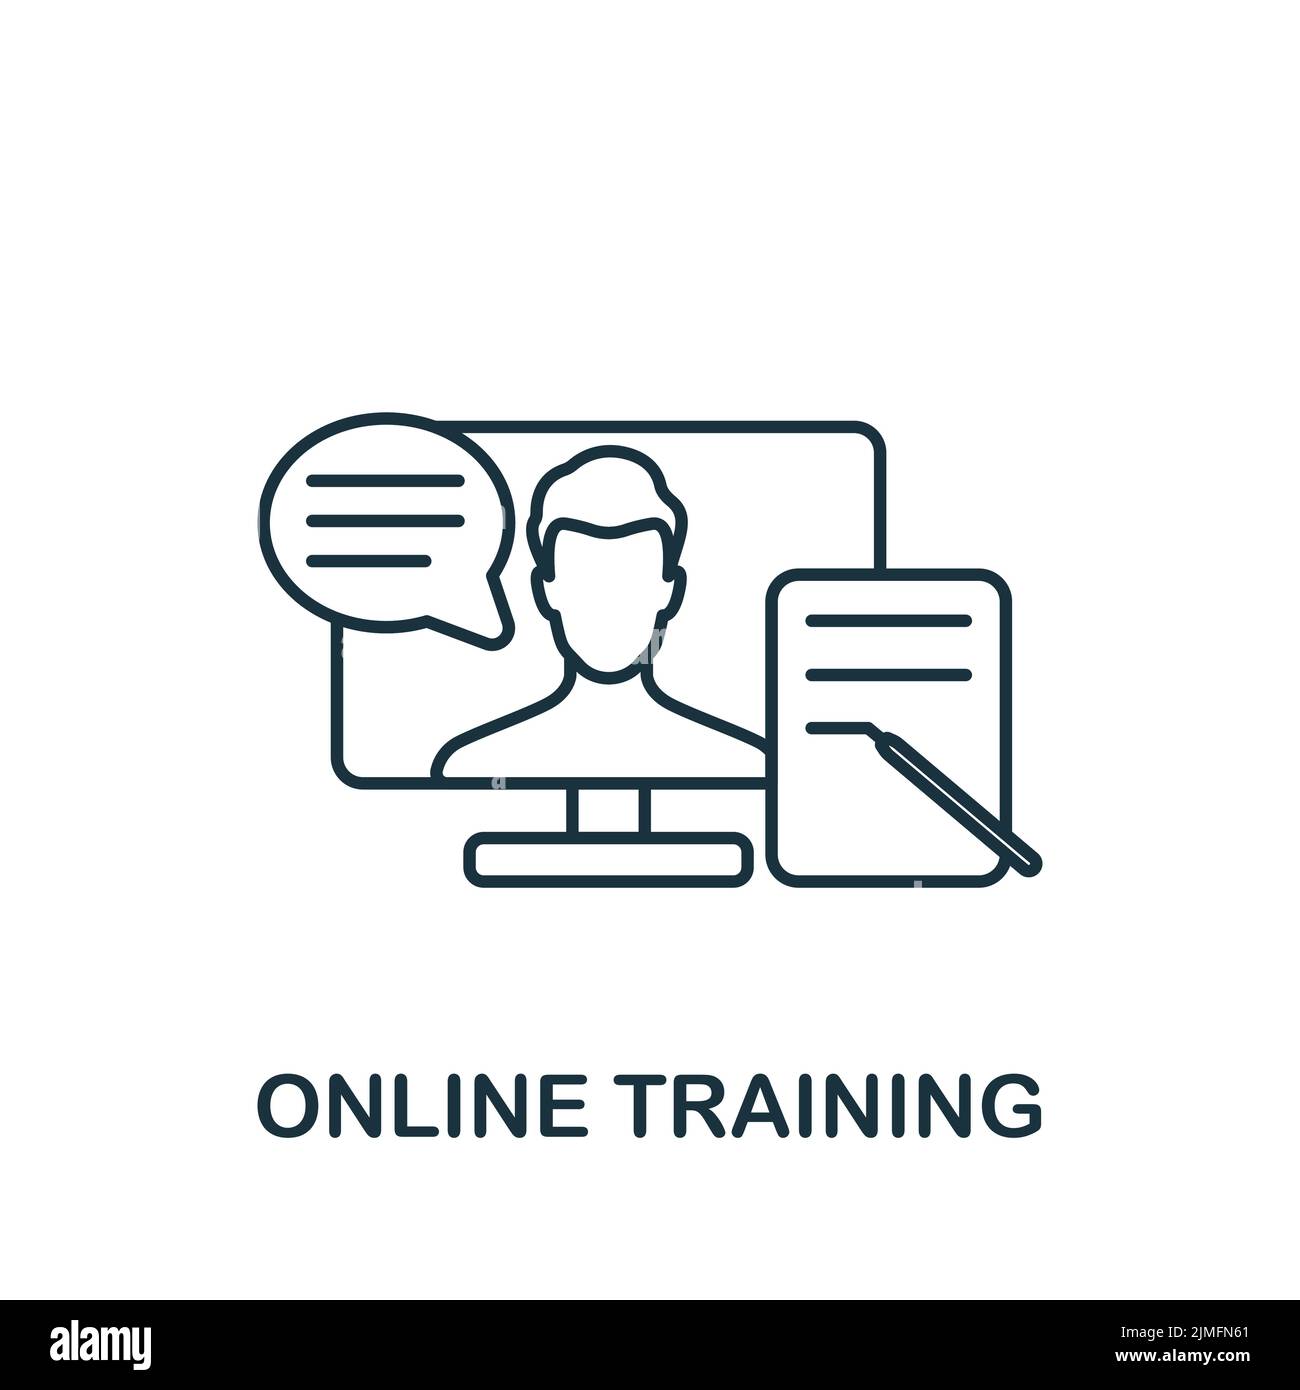 Online Training icon. Monochrome simple Business Training icon for templates, web design and infographics Stock Vector